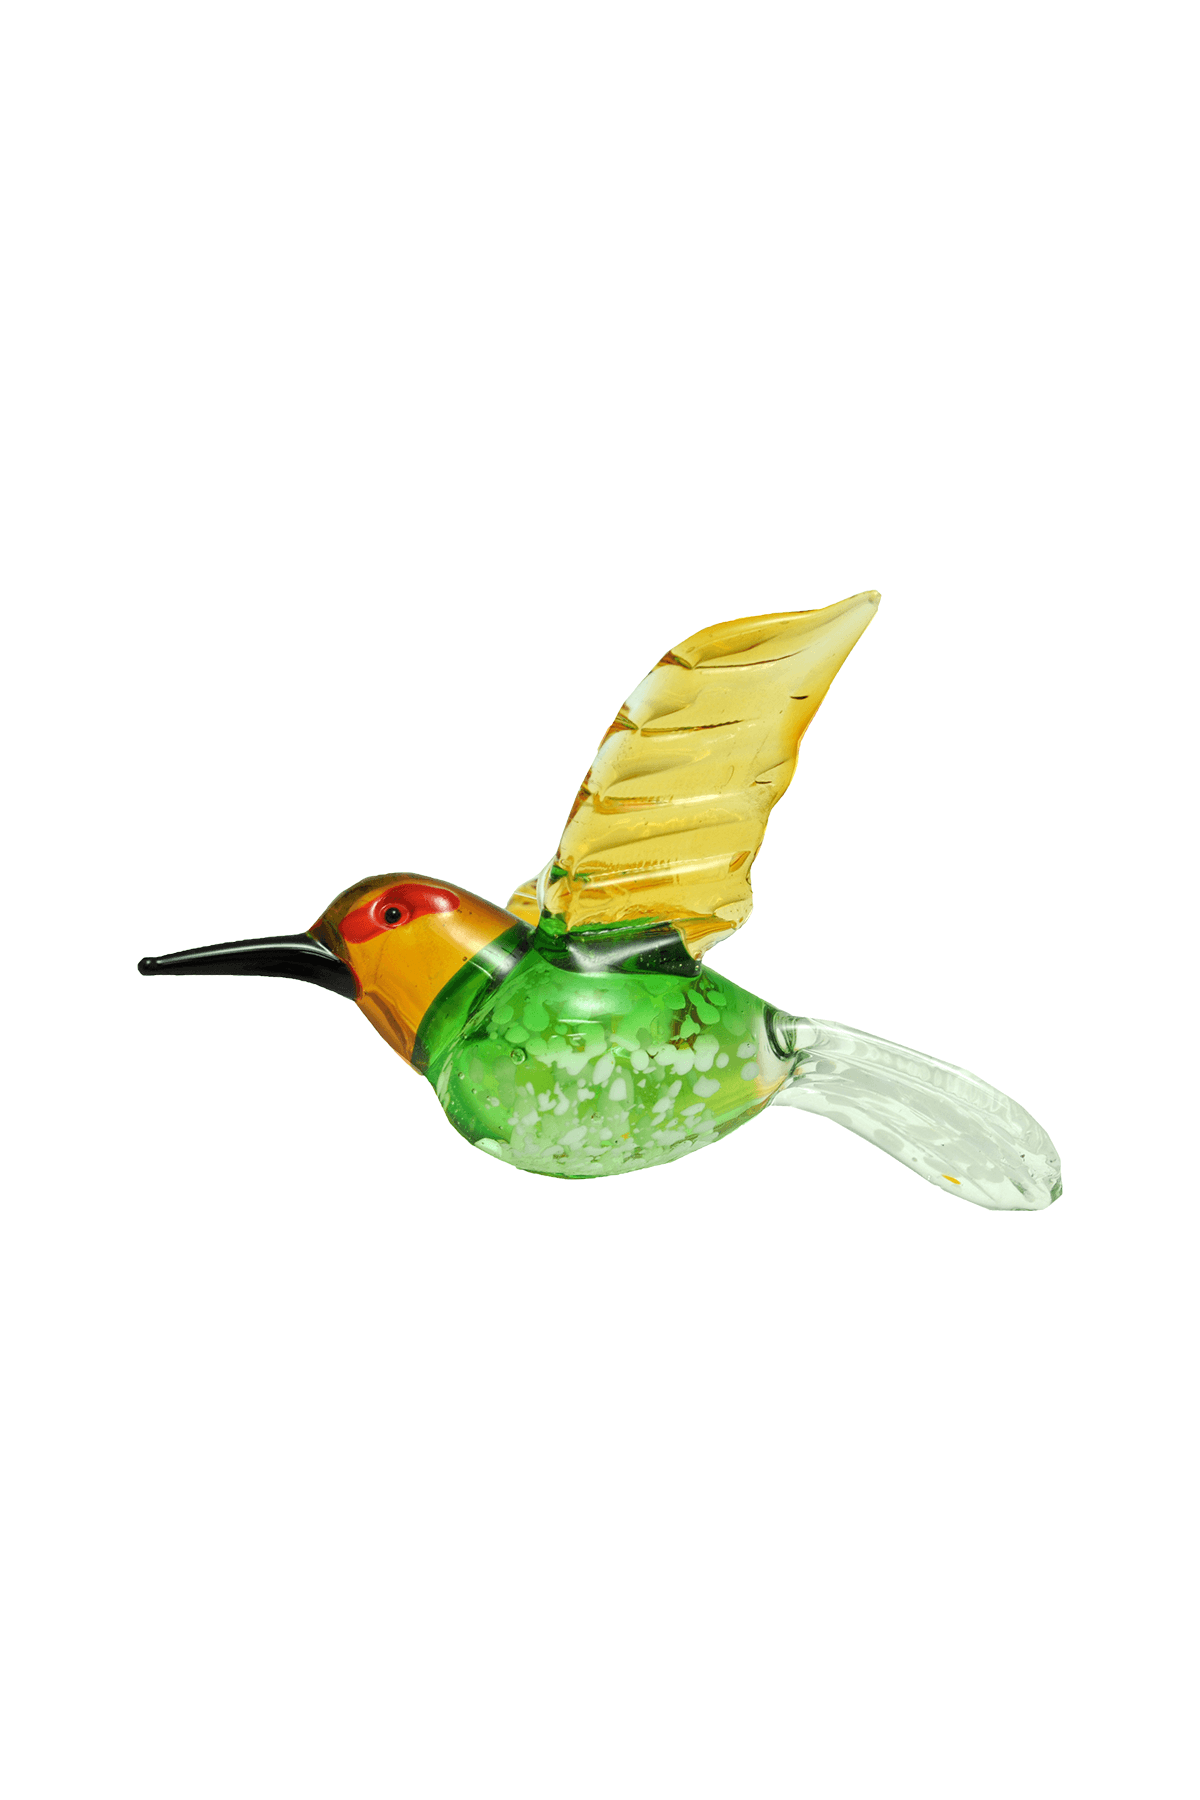 Crystal Castle Glass hummingbird in Yellow, Green and Orange.